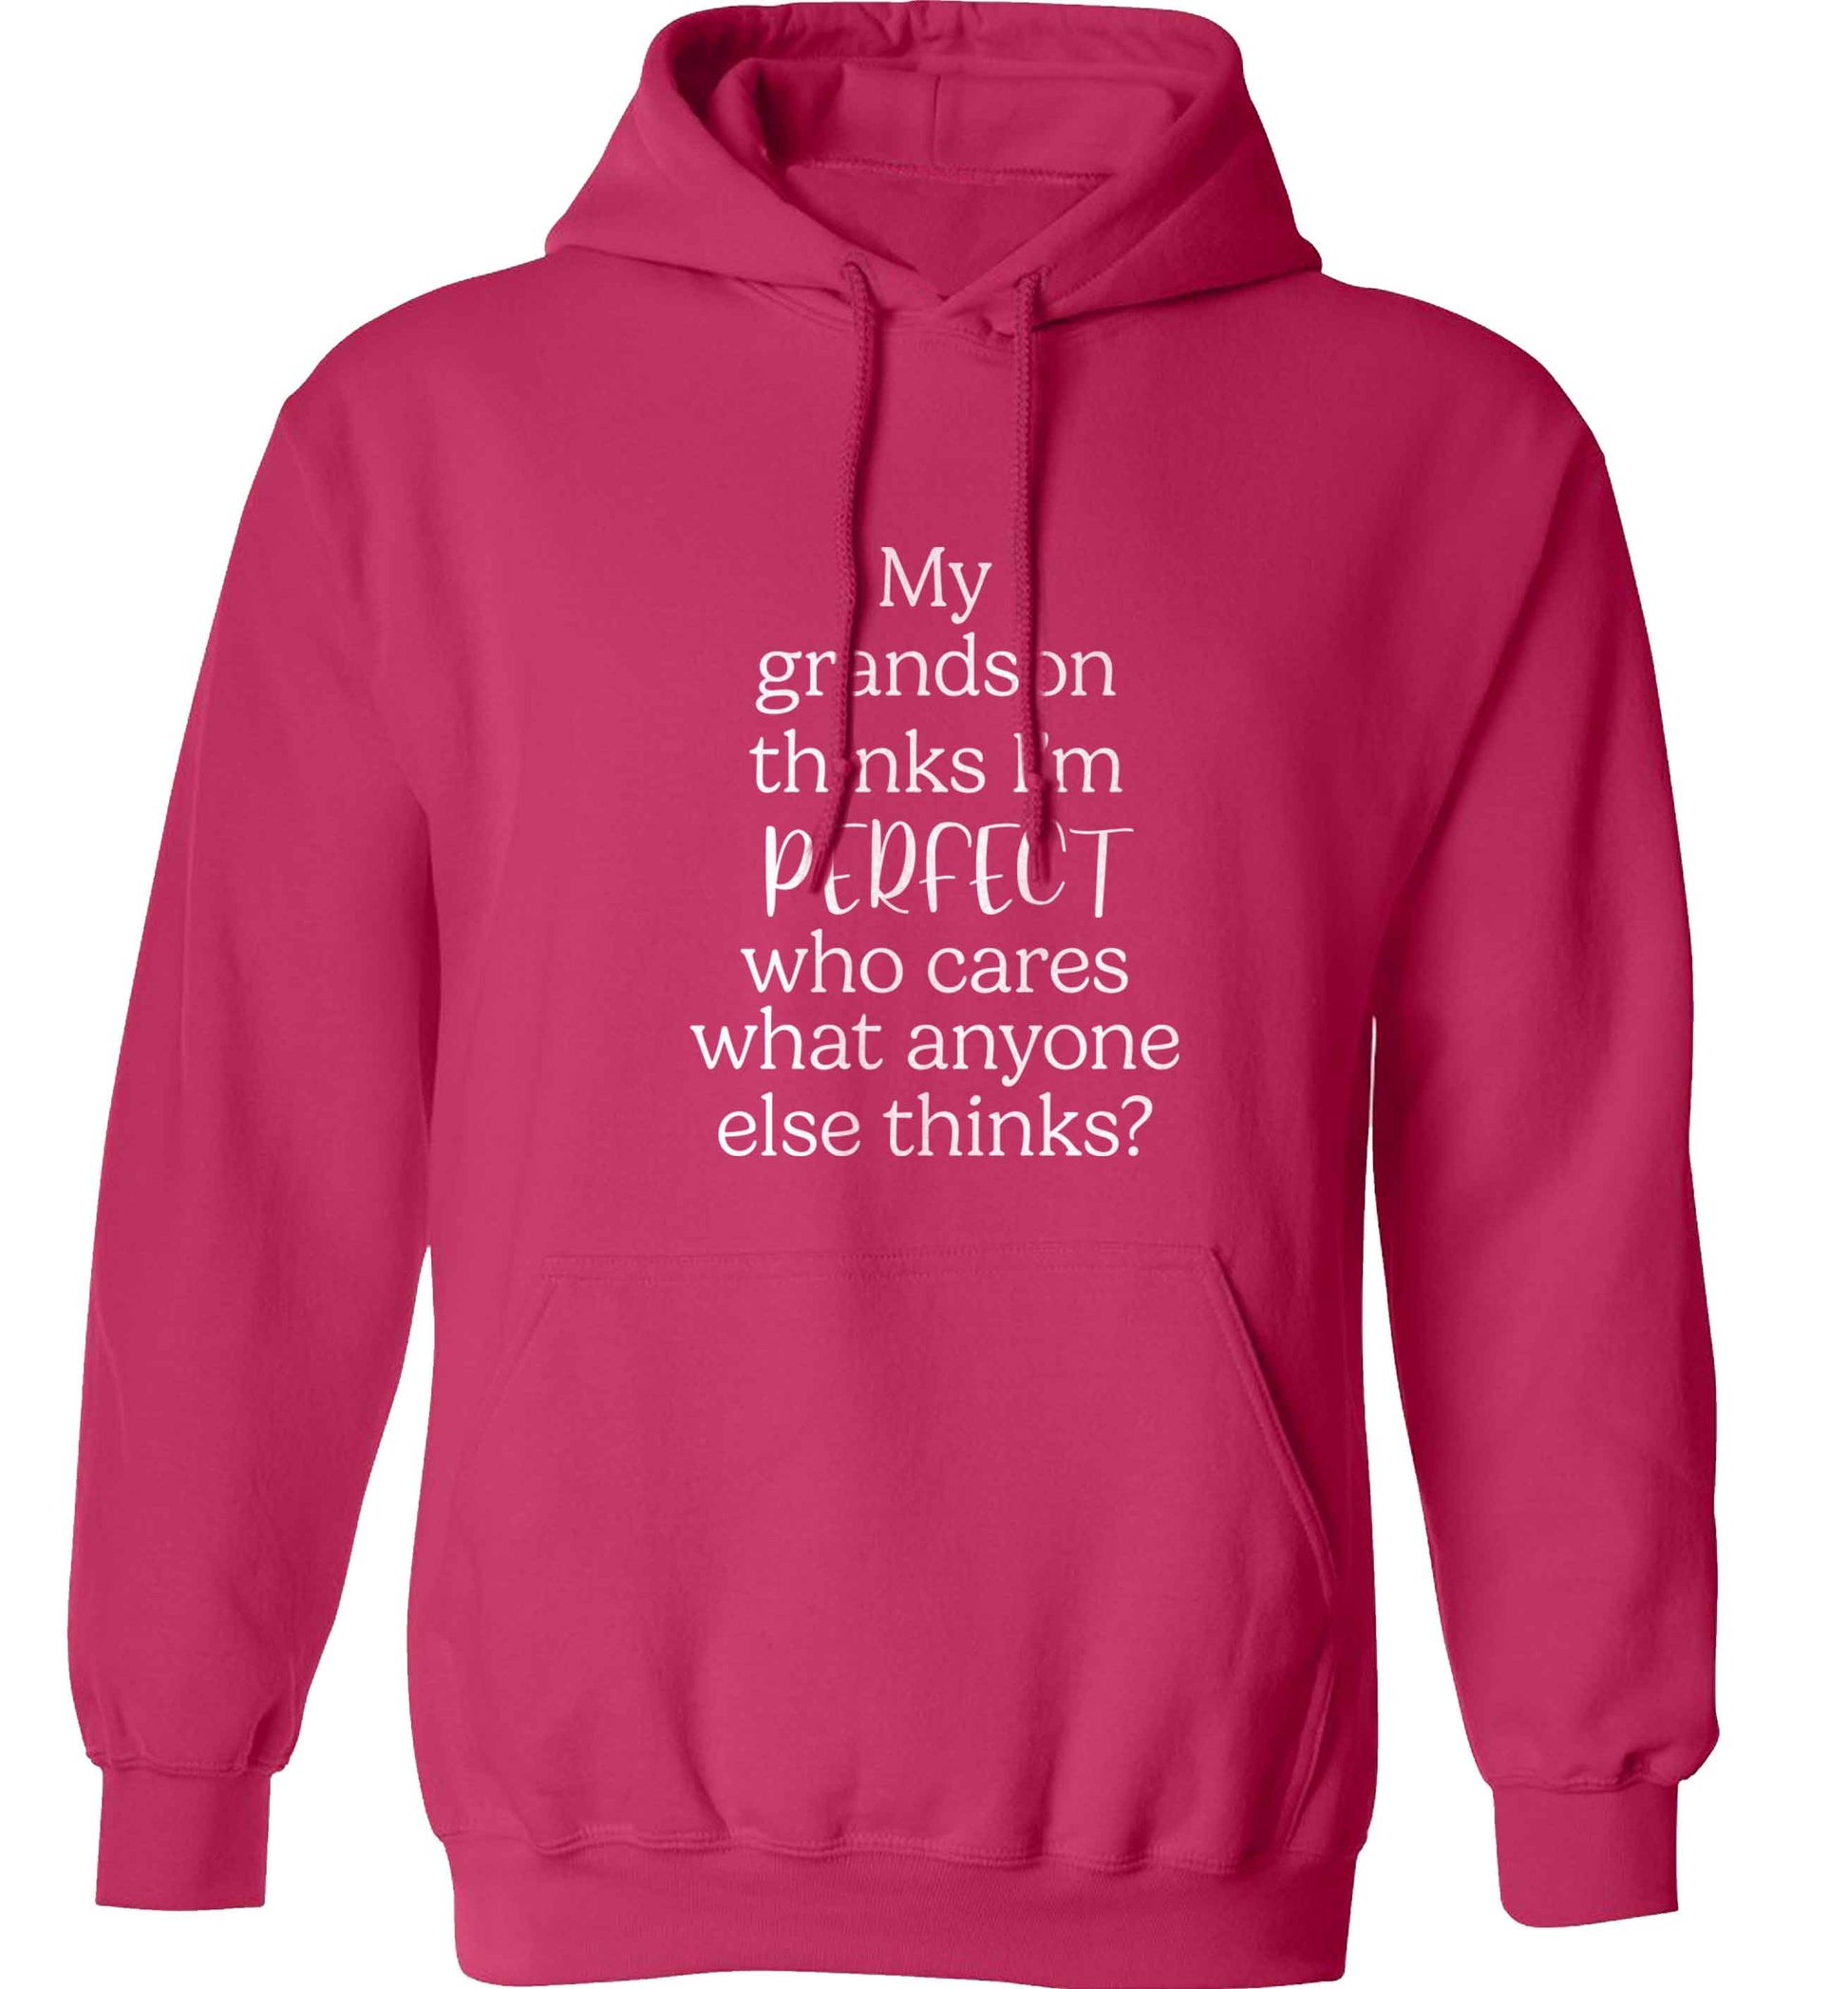 My grandson thinks I'm perfect adults unisex pink hoodie 2XL